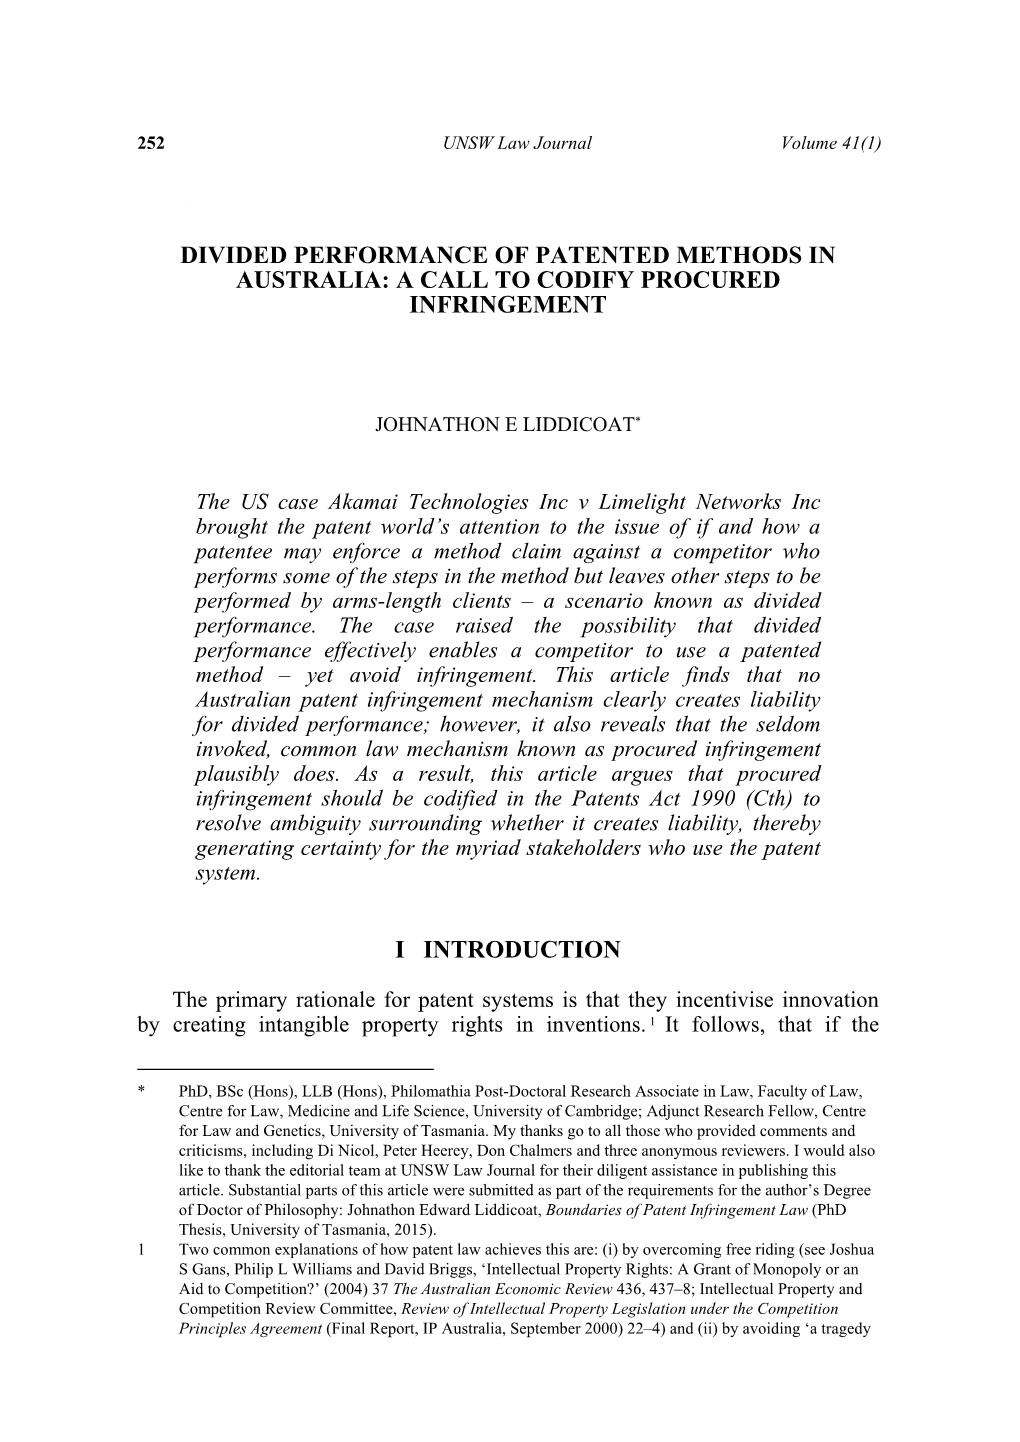 Divided Performance of Patented Methods in Australia: a Call to Codify Procured Infringement